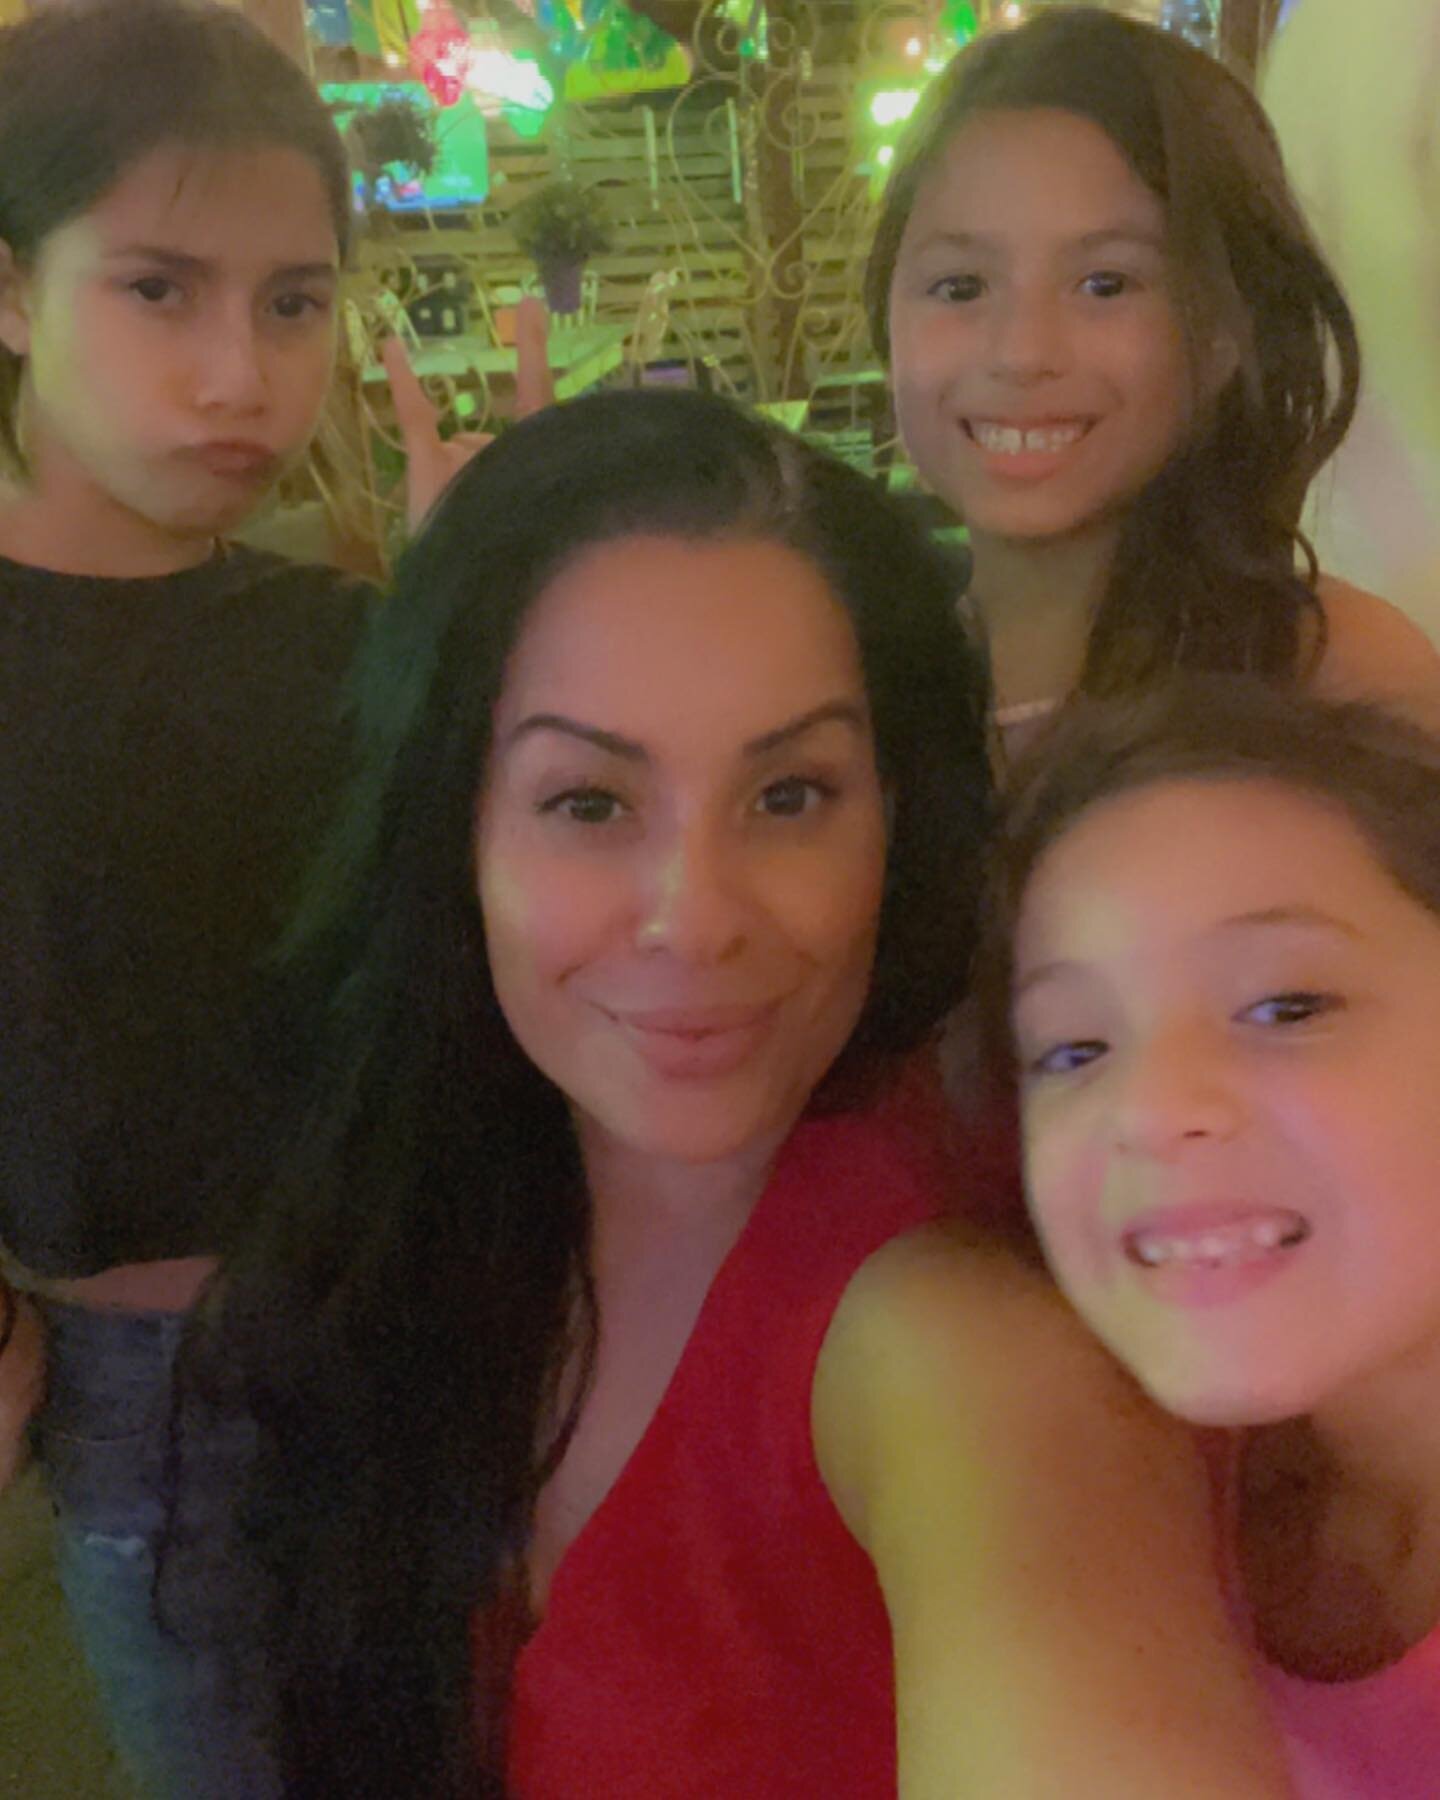 I asked God for a daughter and He blessed me with 3 💗💗💗 #nationaldaughtersday 

#girlmom #girlmama #momlife #girlgang #girlsruntheworld #deardaughter #deardaughters #bestfriends